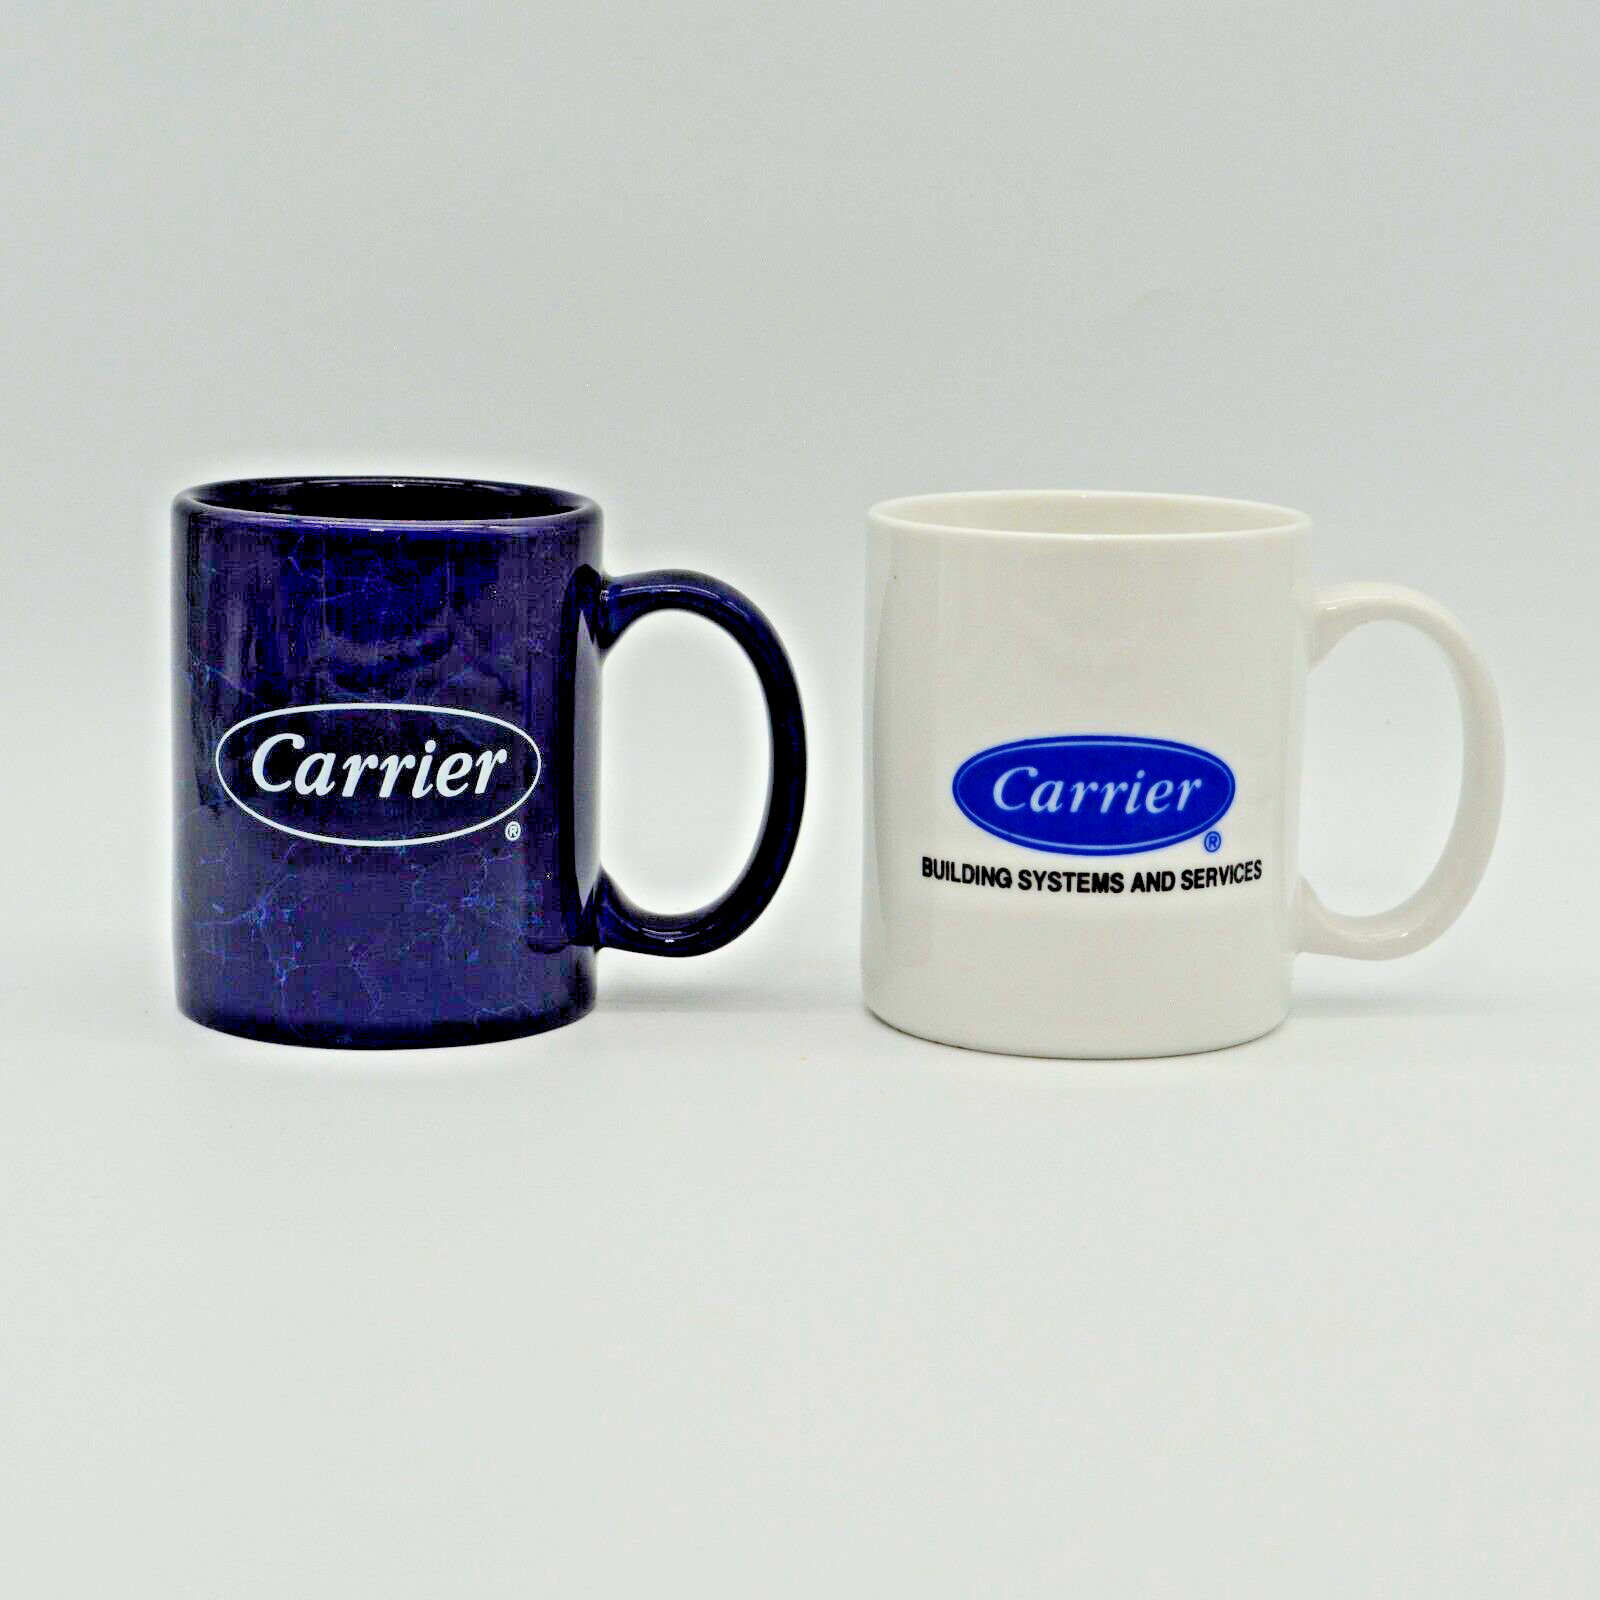 Carrier Coffee Cups  10 fl. oz   Lot of 2 cups